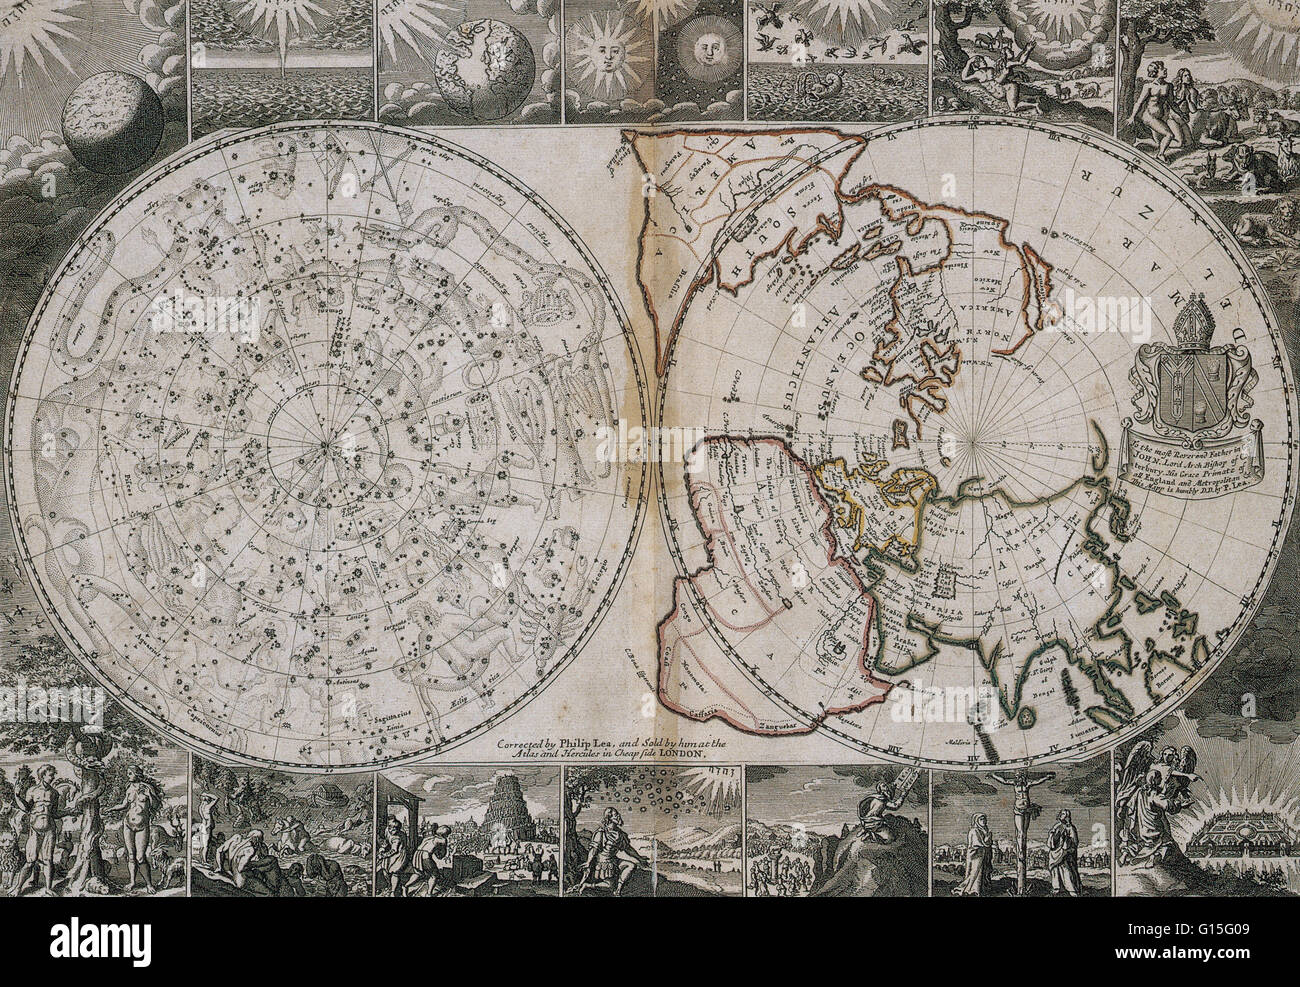 Map from 1691 showing two hemispheres. On the left is a celestial chart of the heavens, and on the right is the world projected from the North Pole. Stock Photo